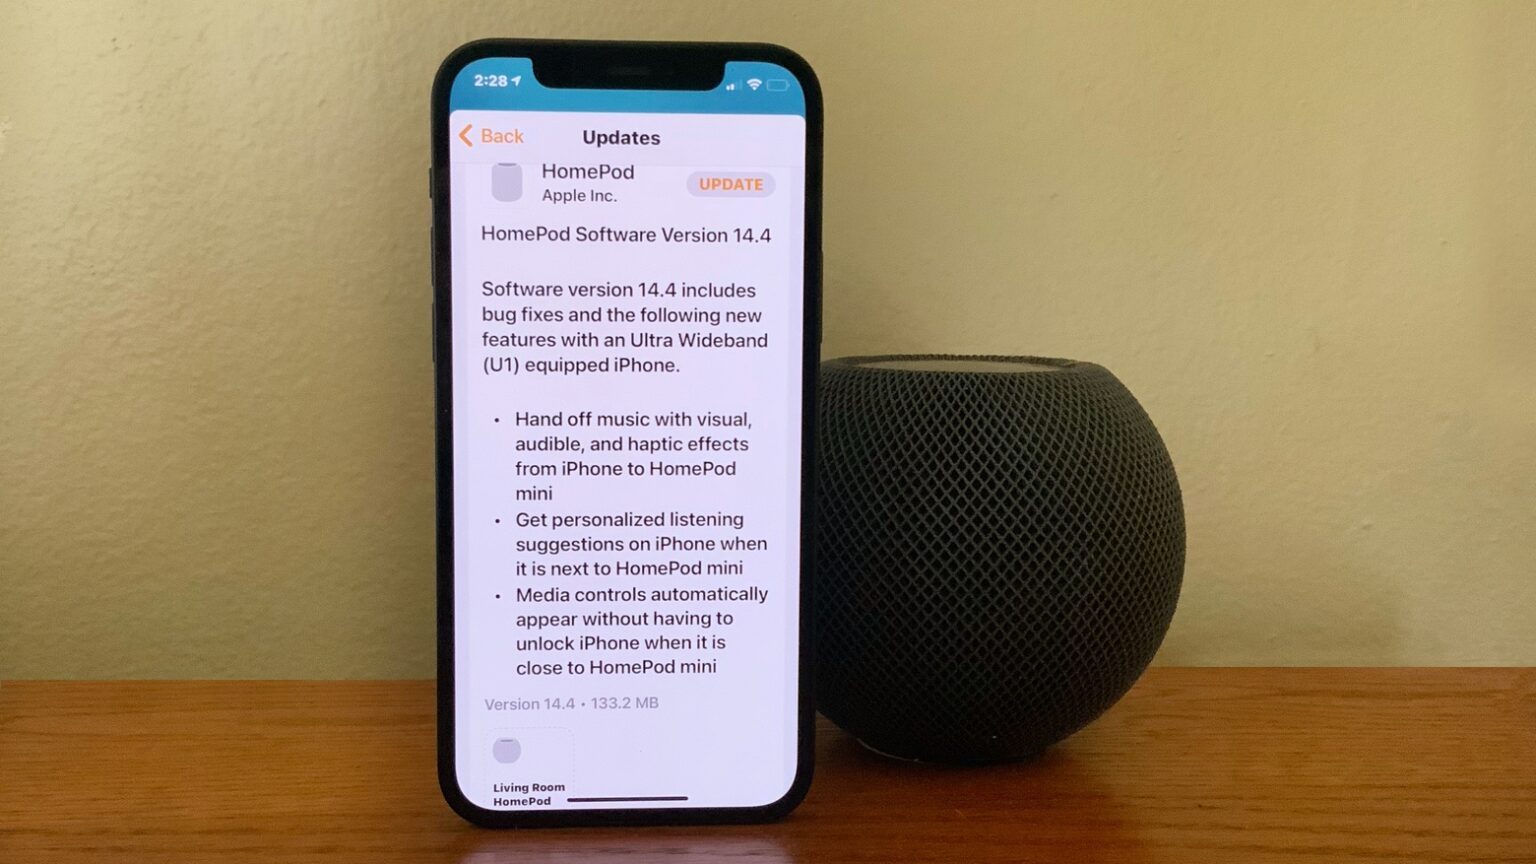 HomePod Software Version 14.4 debuted January 26.